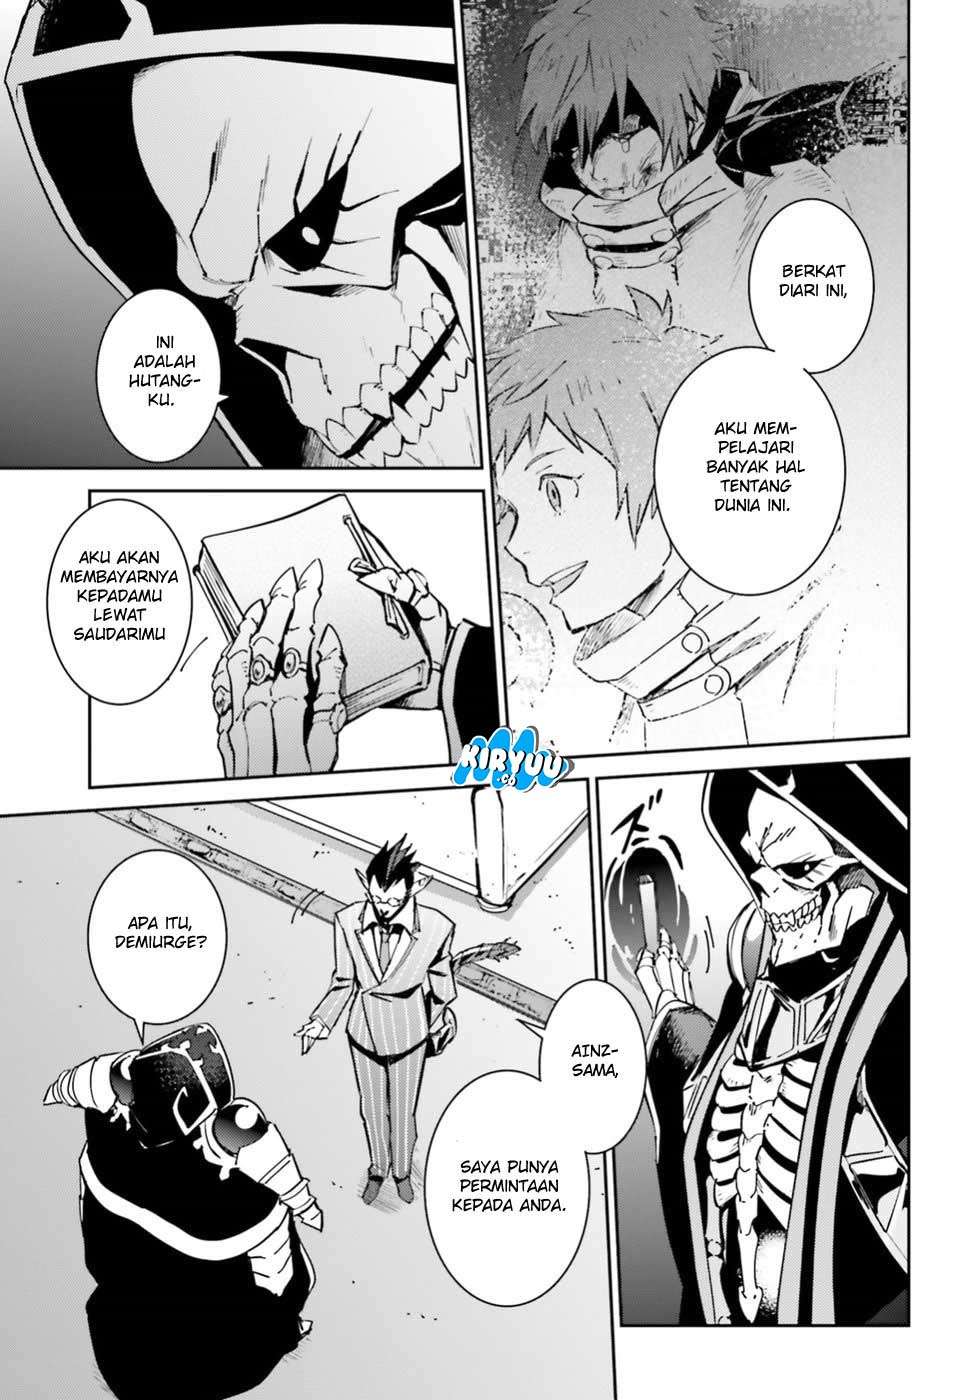 Overlord Chapter 40 52